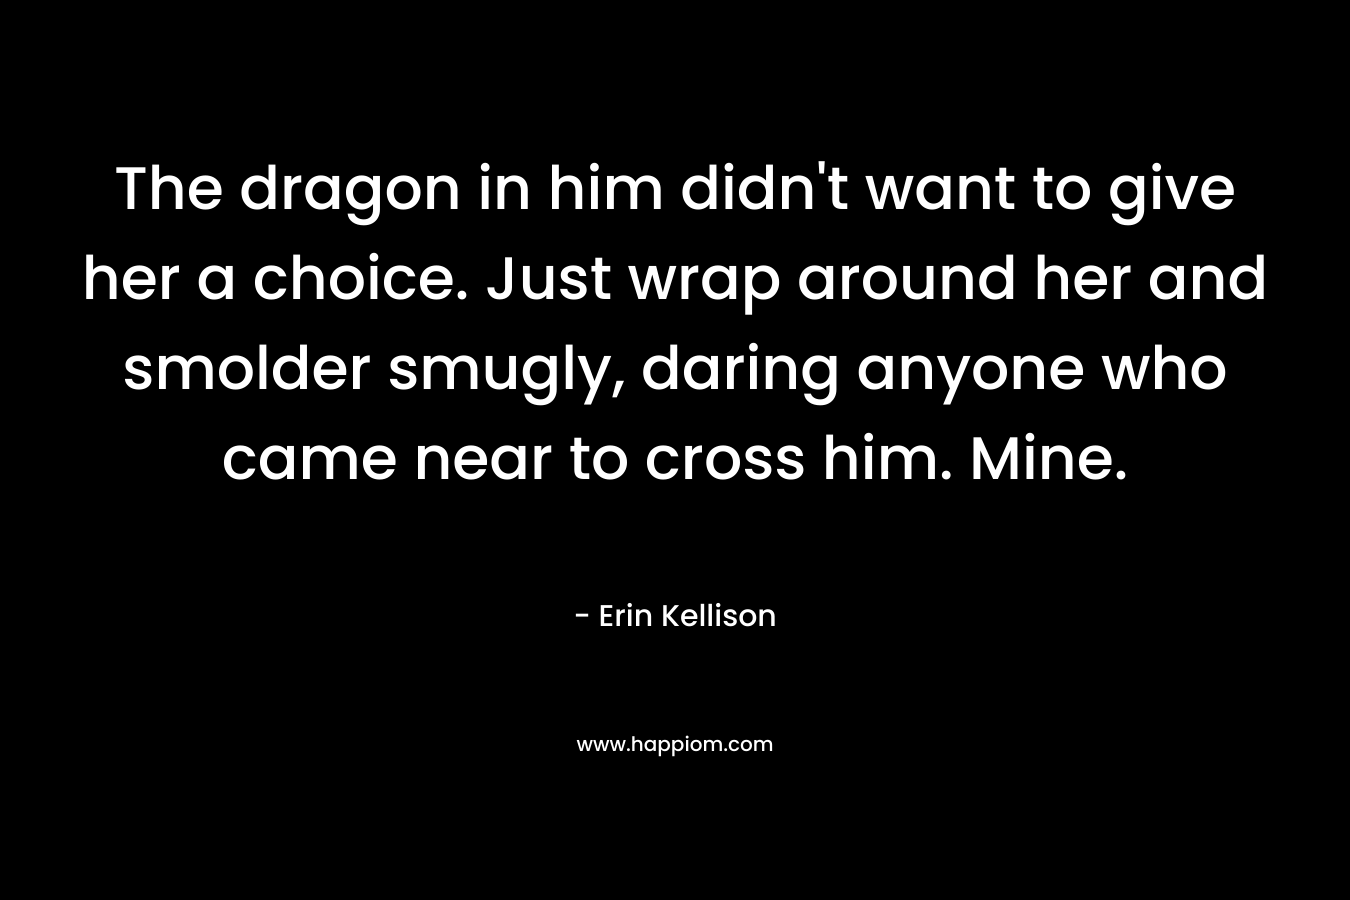 The dragon in him didn’t want to give her a choice. Just wrap around her and smolder smugly, daring anyone who came near to cross him. Mine. – Erin Kellison